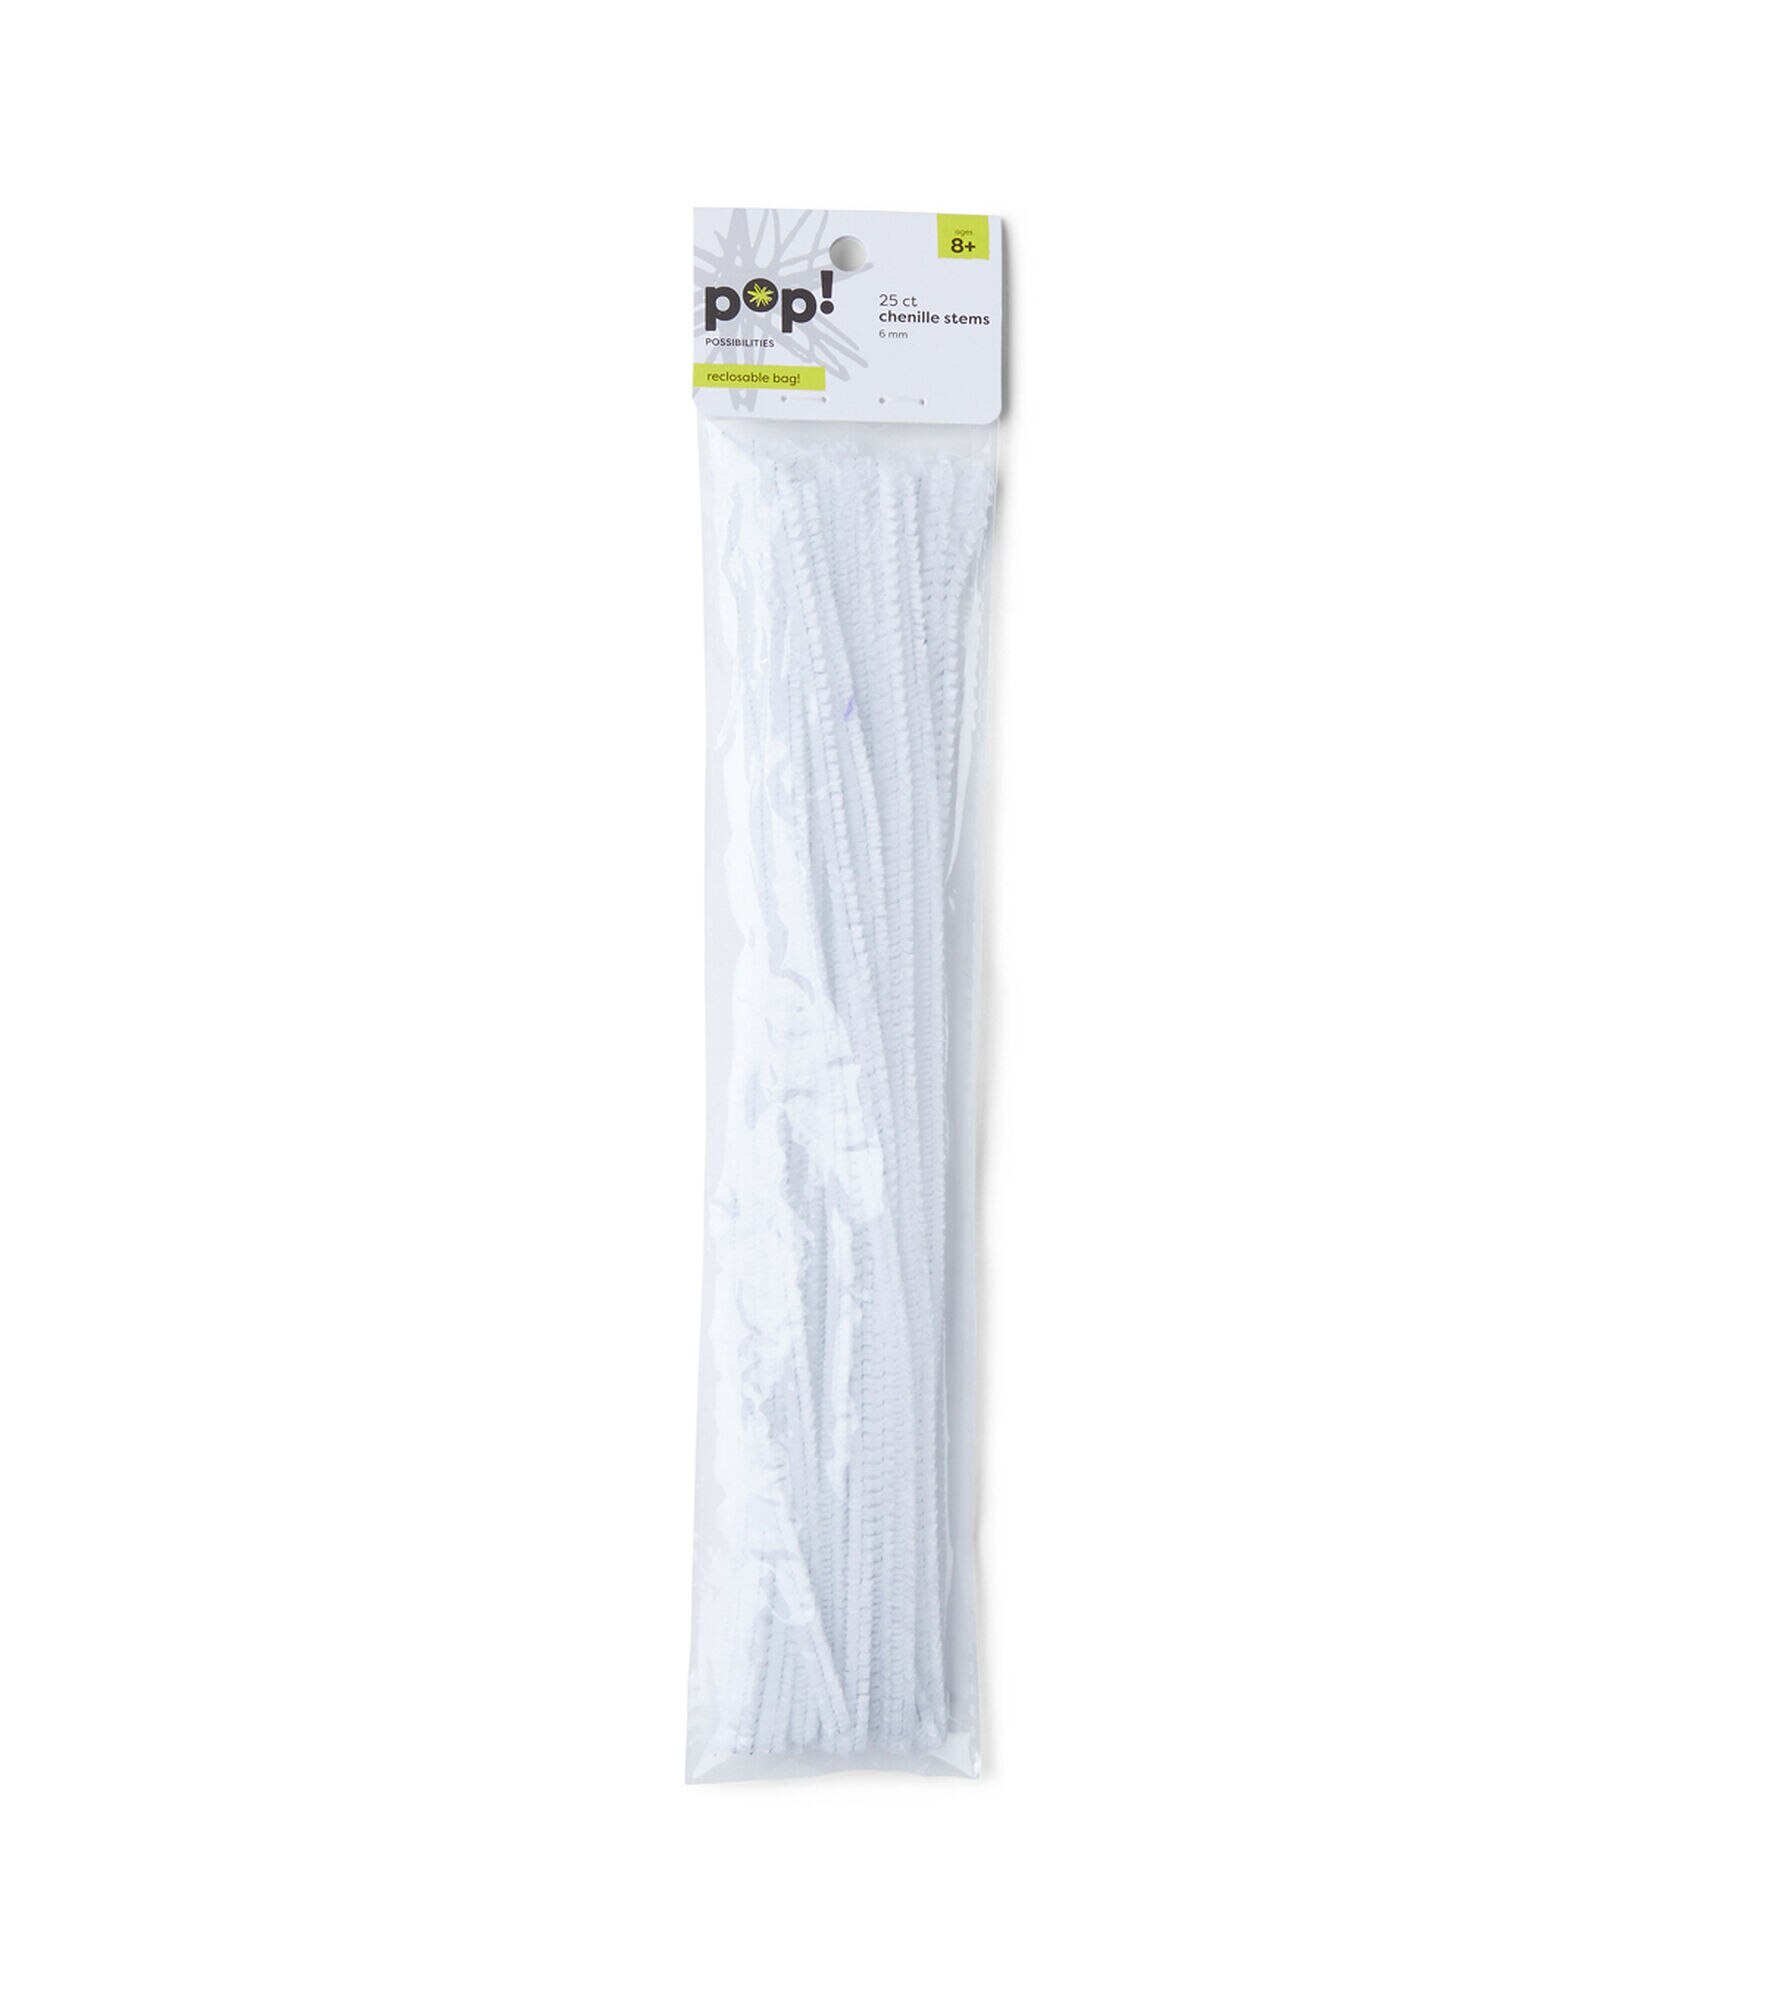 Chenille Stems White 6mm 12 Long 25 Pieces 